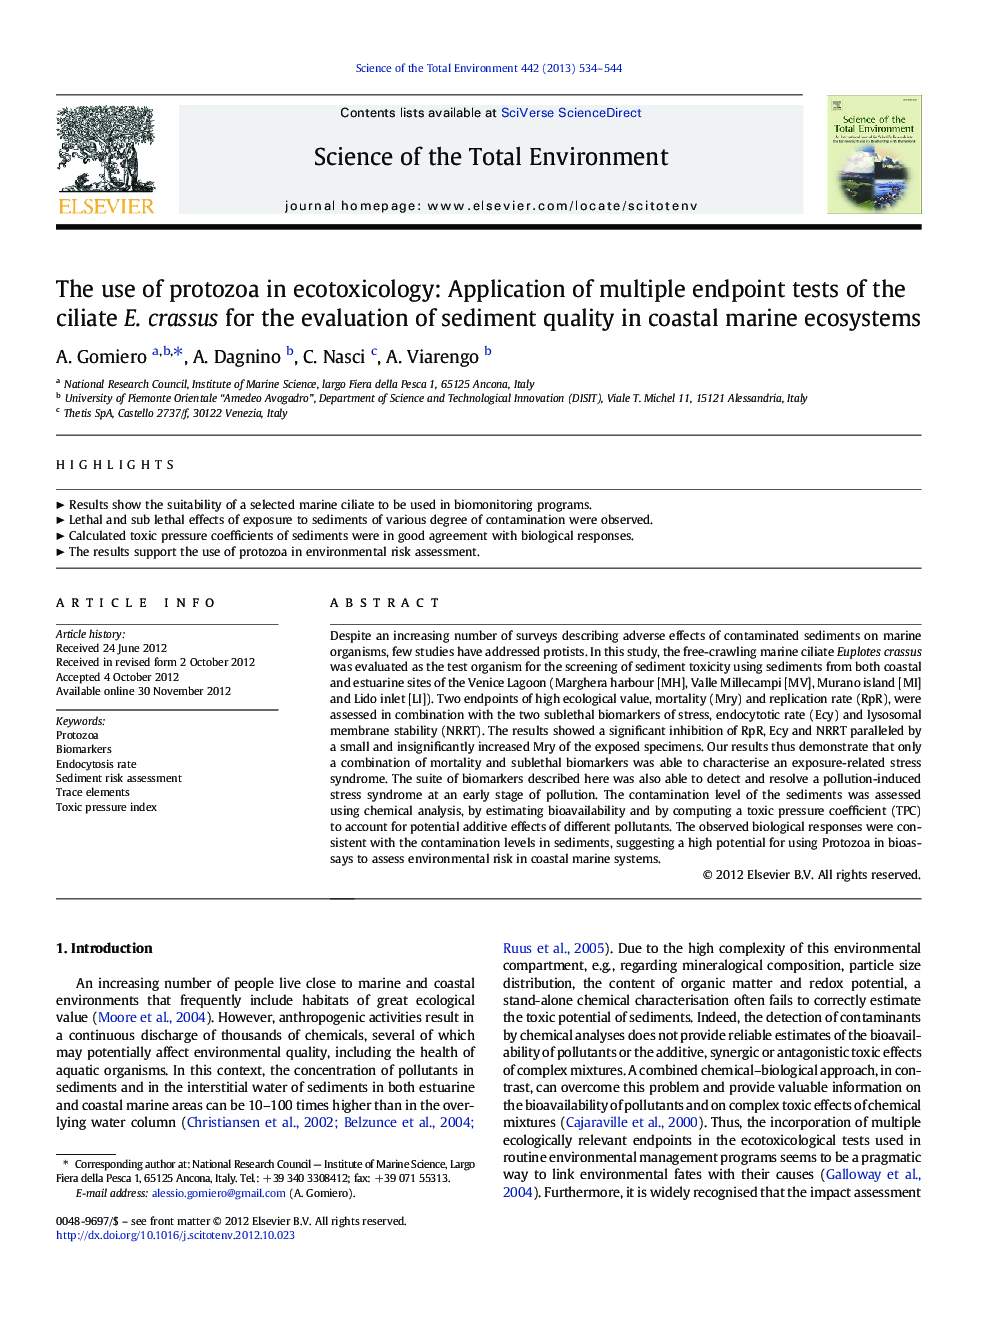 The use of protozoa in ecotoxicology: Application of multiple endpoint tests of the ciliate E. crassus for the evaluation of sediment quality in coastal marine ecosystems